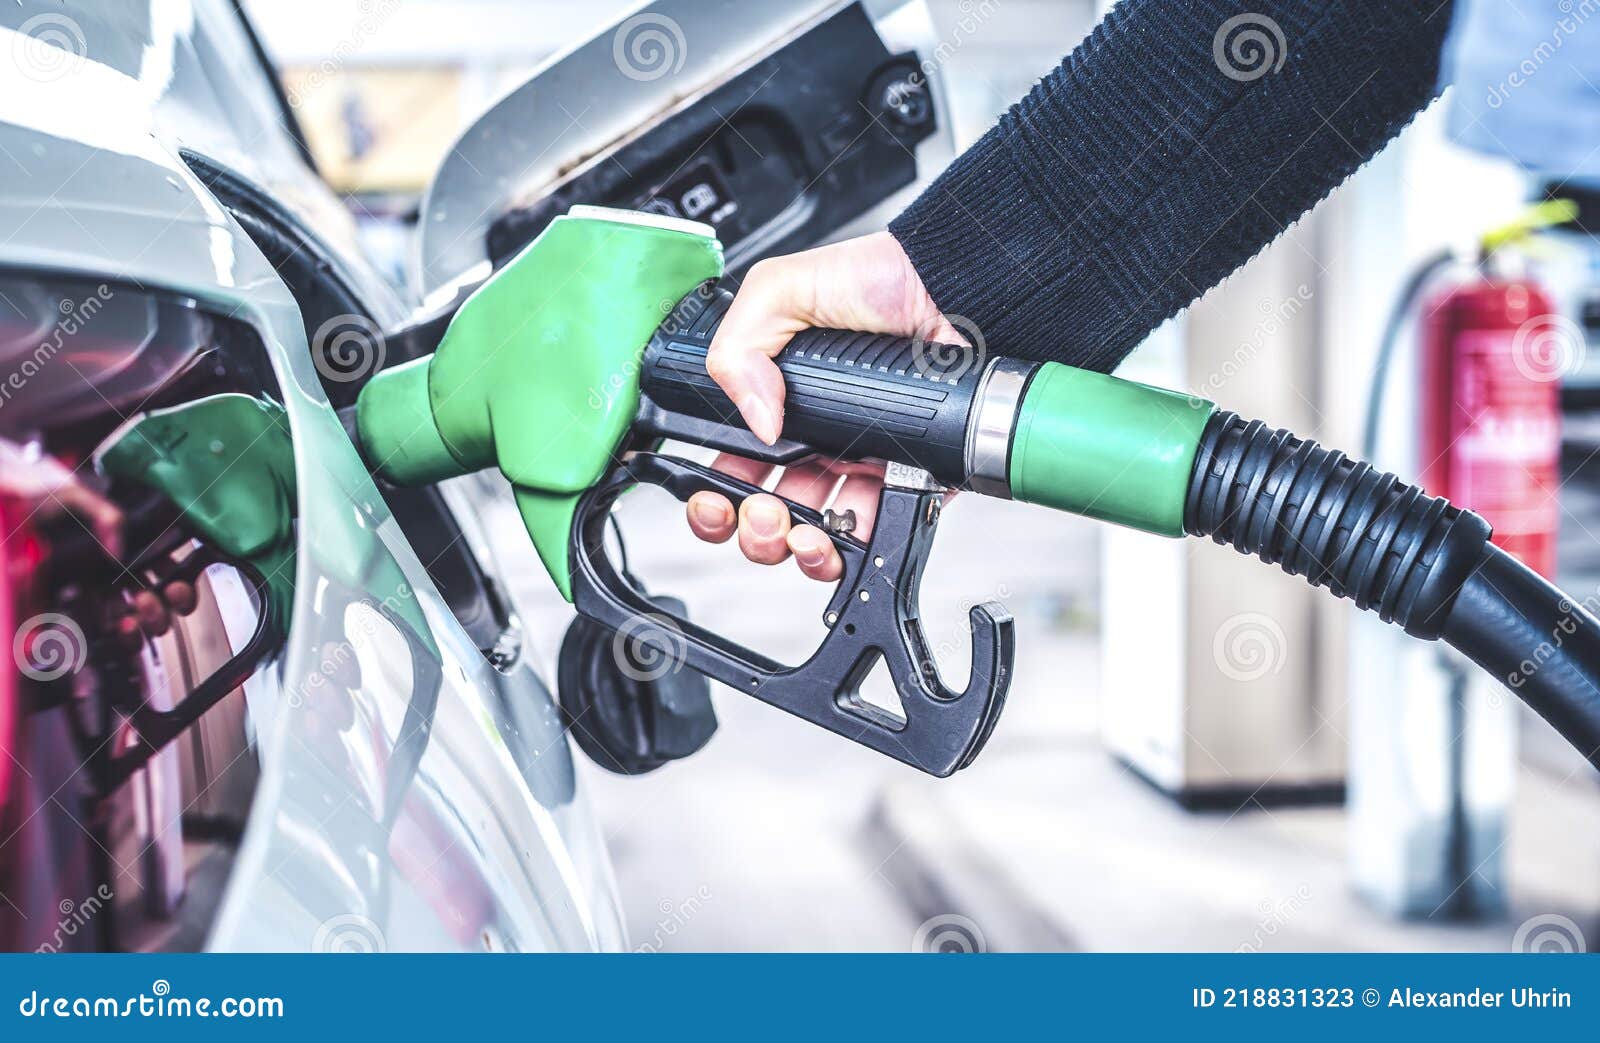 woman pumping gasoline fuel in car at gas station.